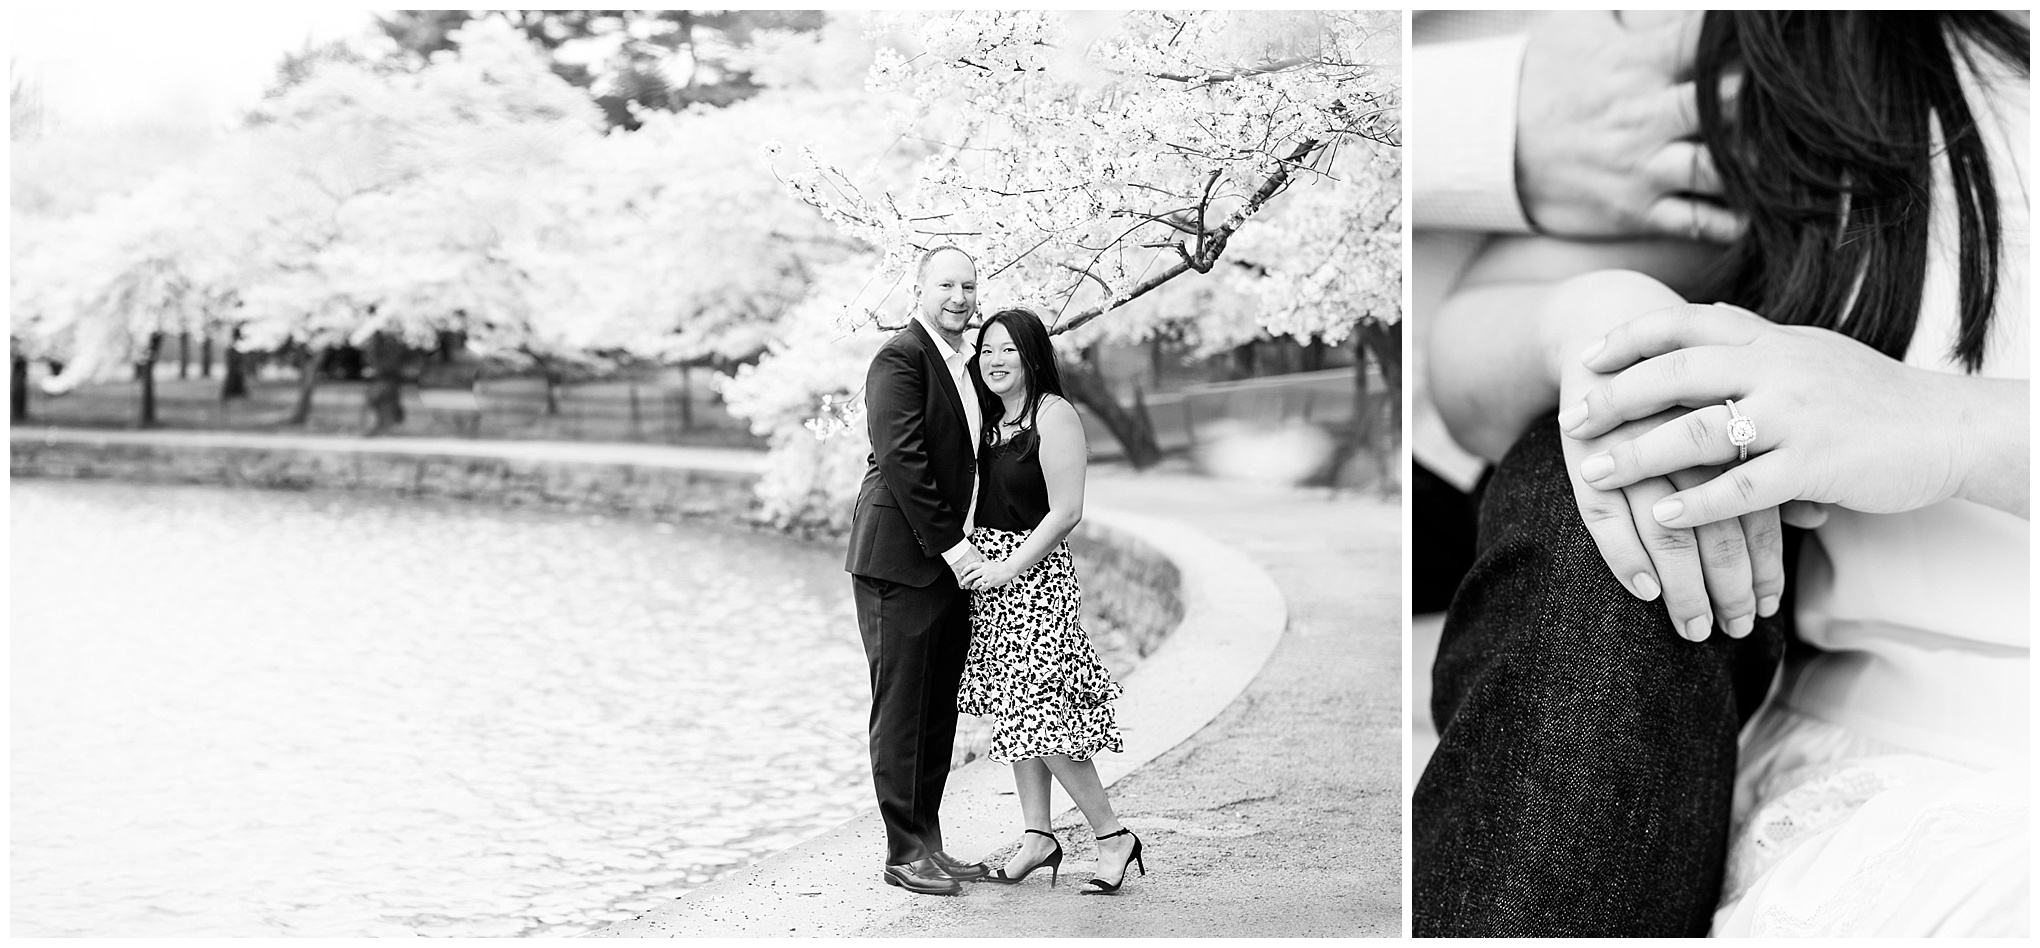 engaged couple, engagement portraits, photo shoot outfit ideas, cherry blossom engagement portraits, cherry blossom portraits, cherry blossoms, DC cherry blossoms, tidal basin, DC tidal basin, white cotton dress, white cotton sleeveless dress, bow sleeves, classic cherry blossom engagement session, D.C. engagement photographer, cherry blossom trees, floral print skirt, black and navy outfit, black and white outfit, couple holding hands, black and white photo